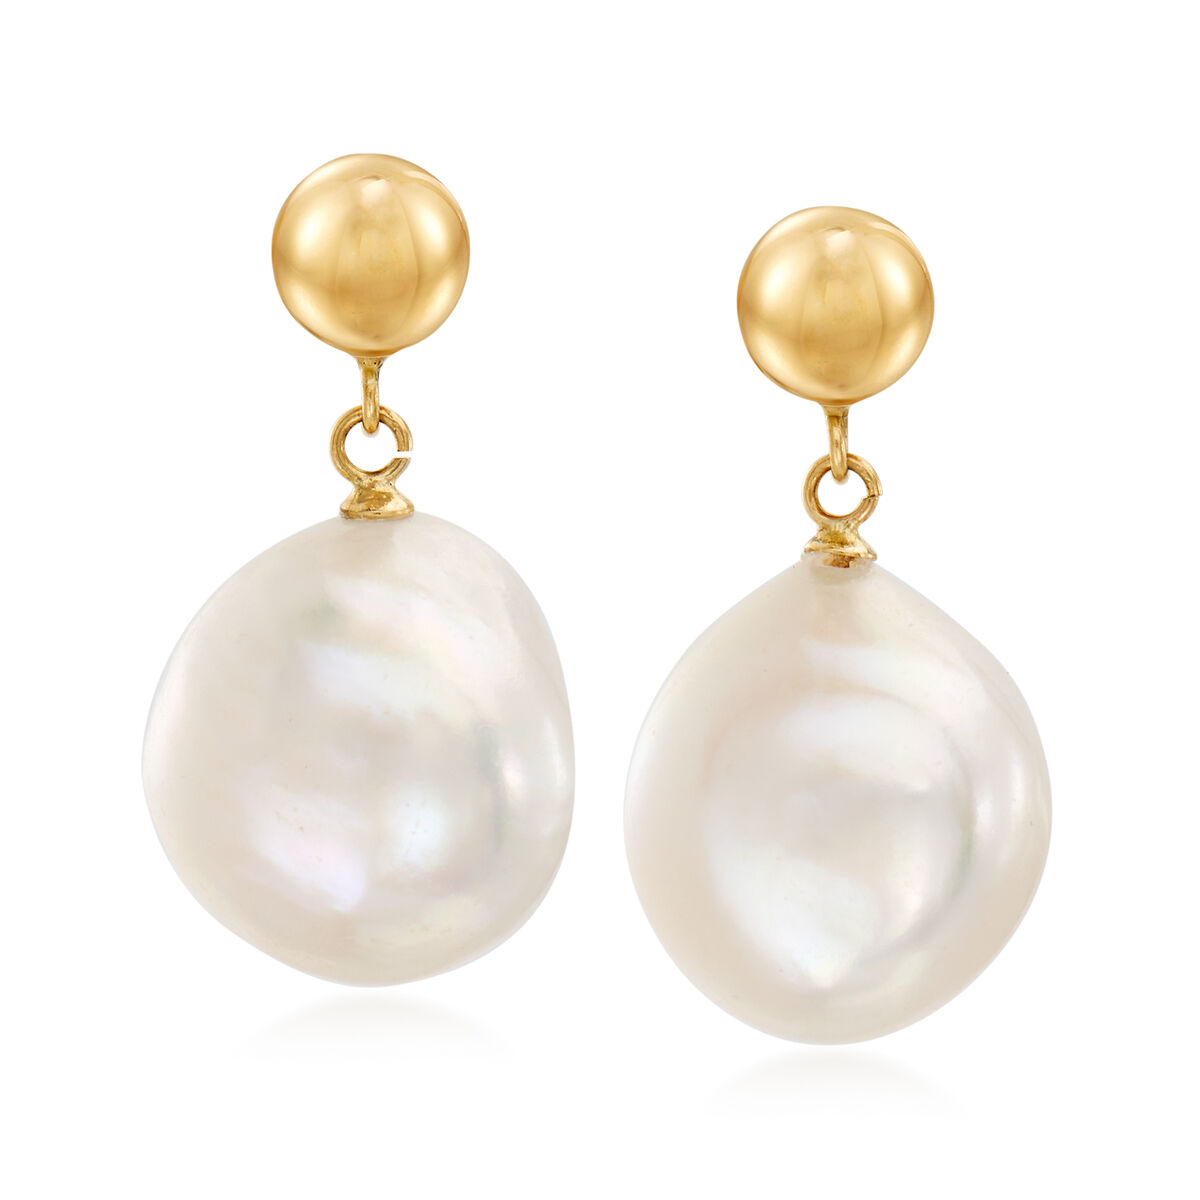 13-14mm Cultured Baroque Pearl Drop Earrings in 14kt Yellow Gold | Ross ...